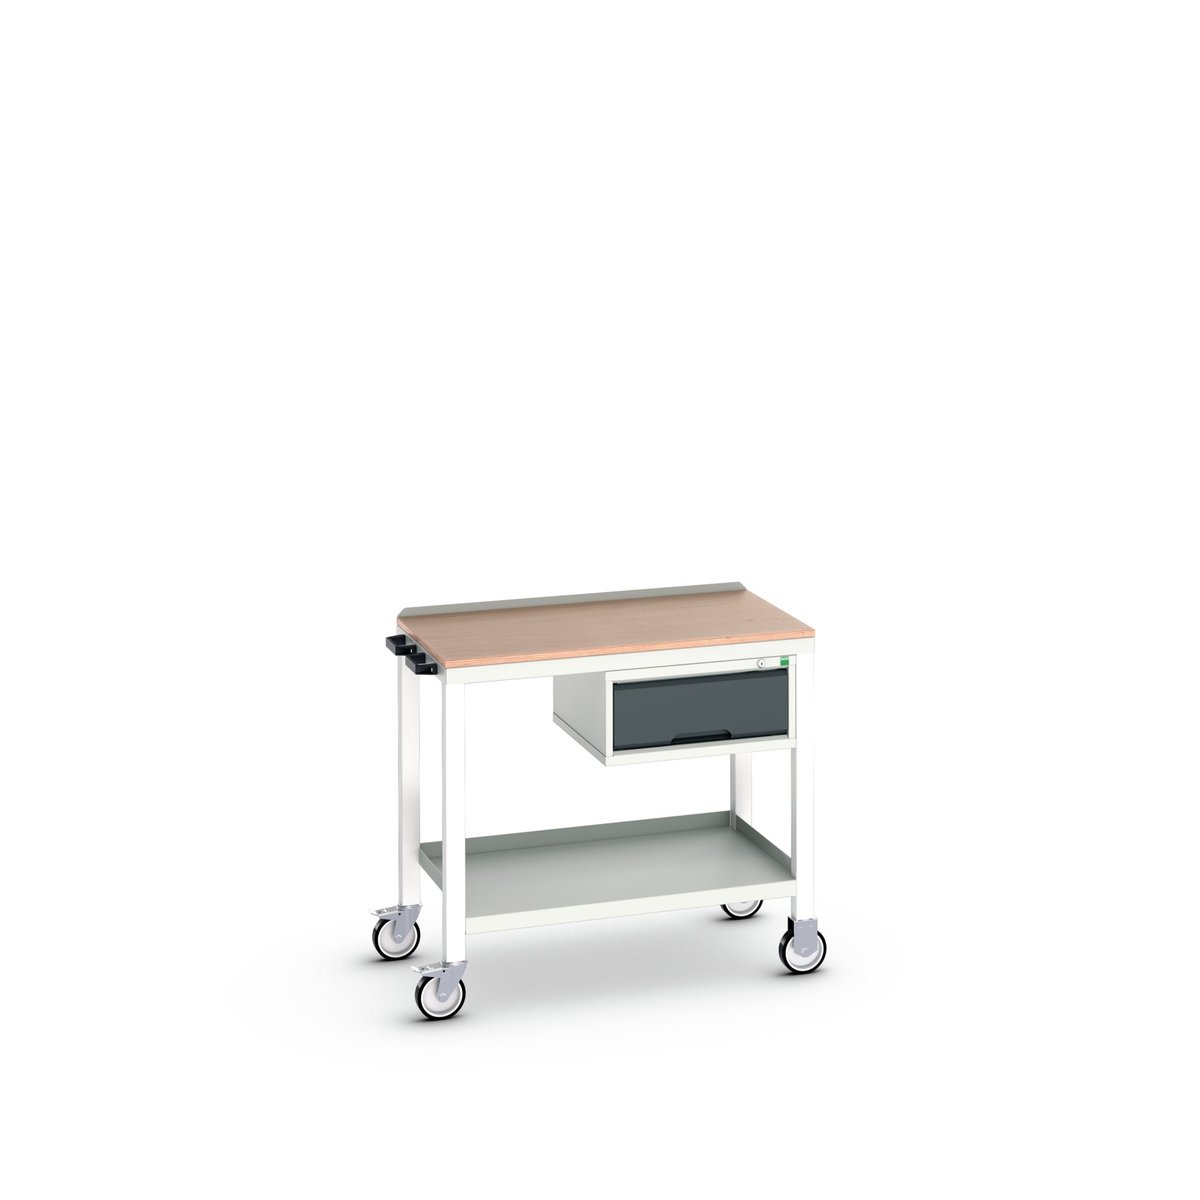 16922801. - verso mobile welded bench